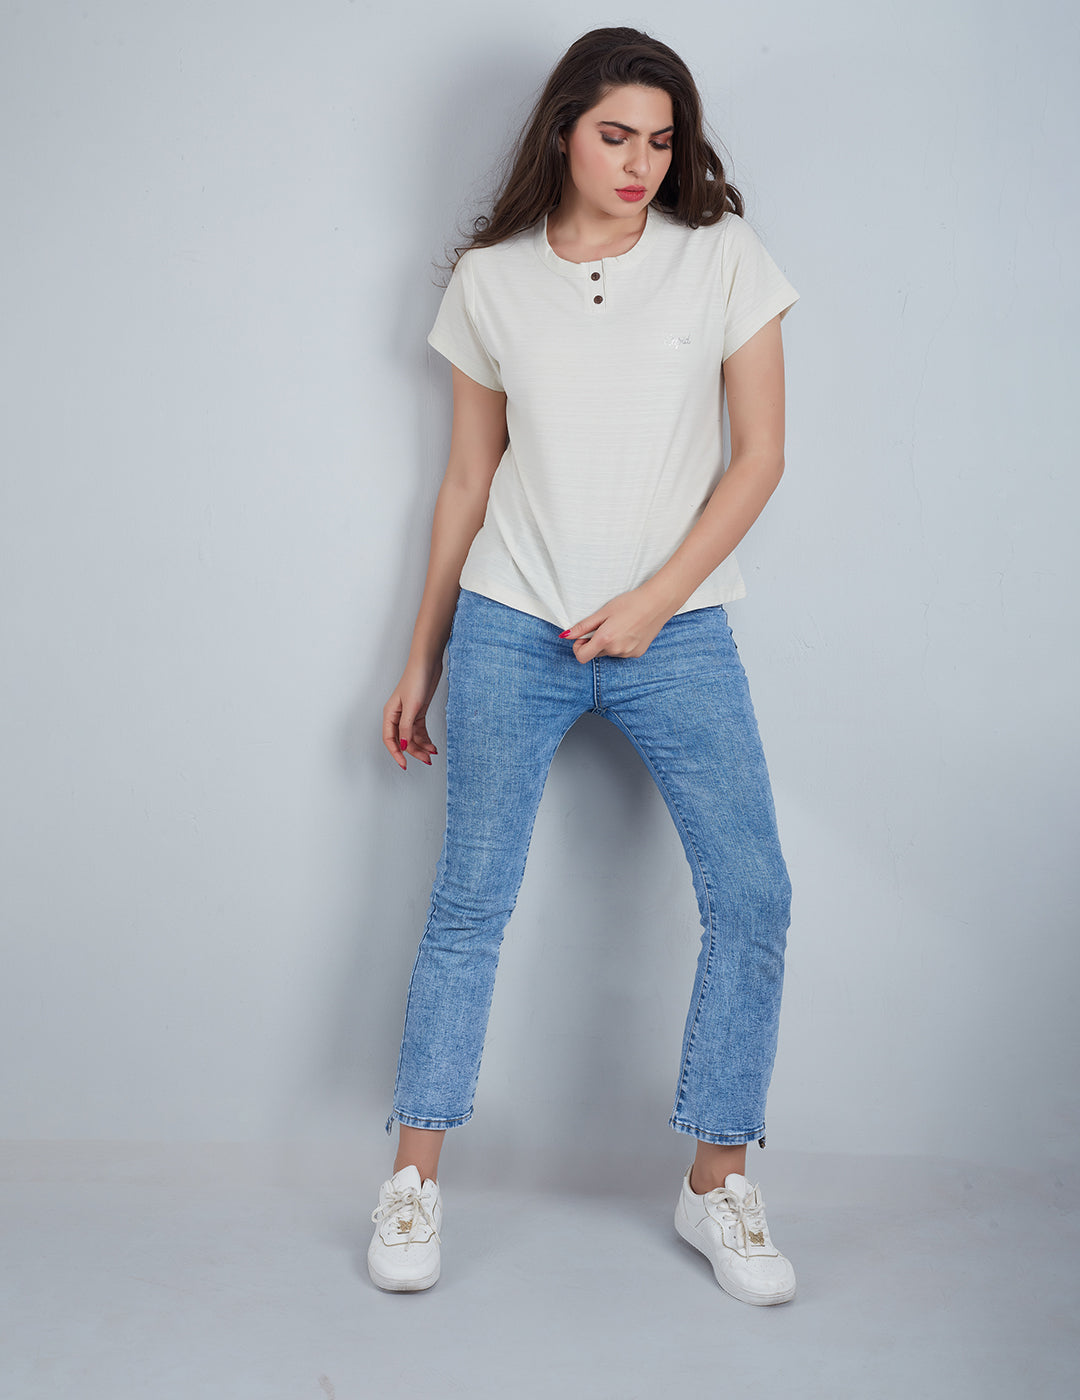 Stylish Plain Short T-shirts For Women - Off White At Best Prices